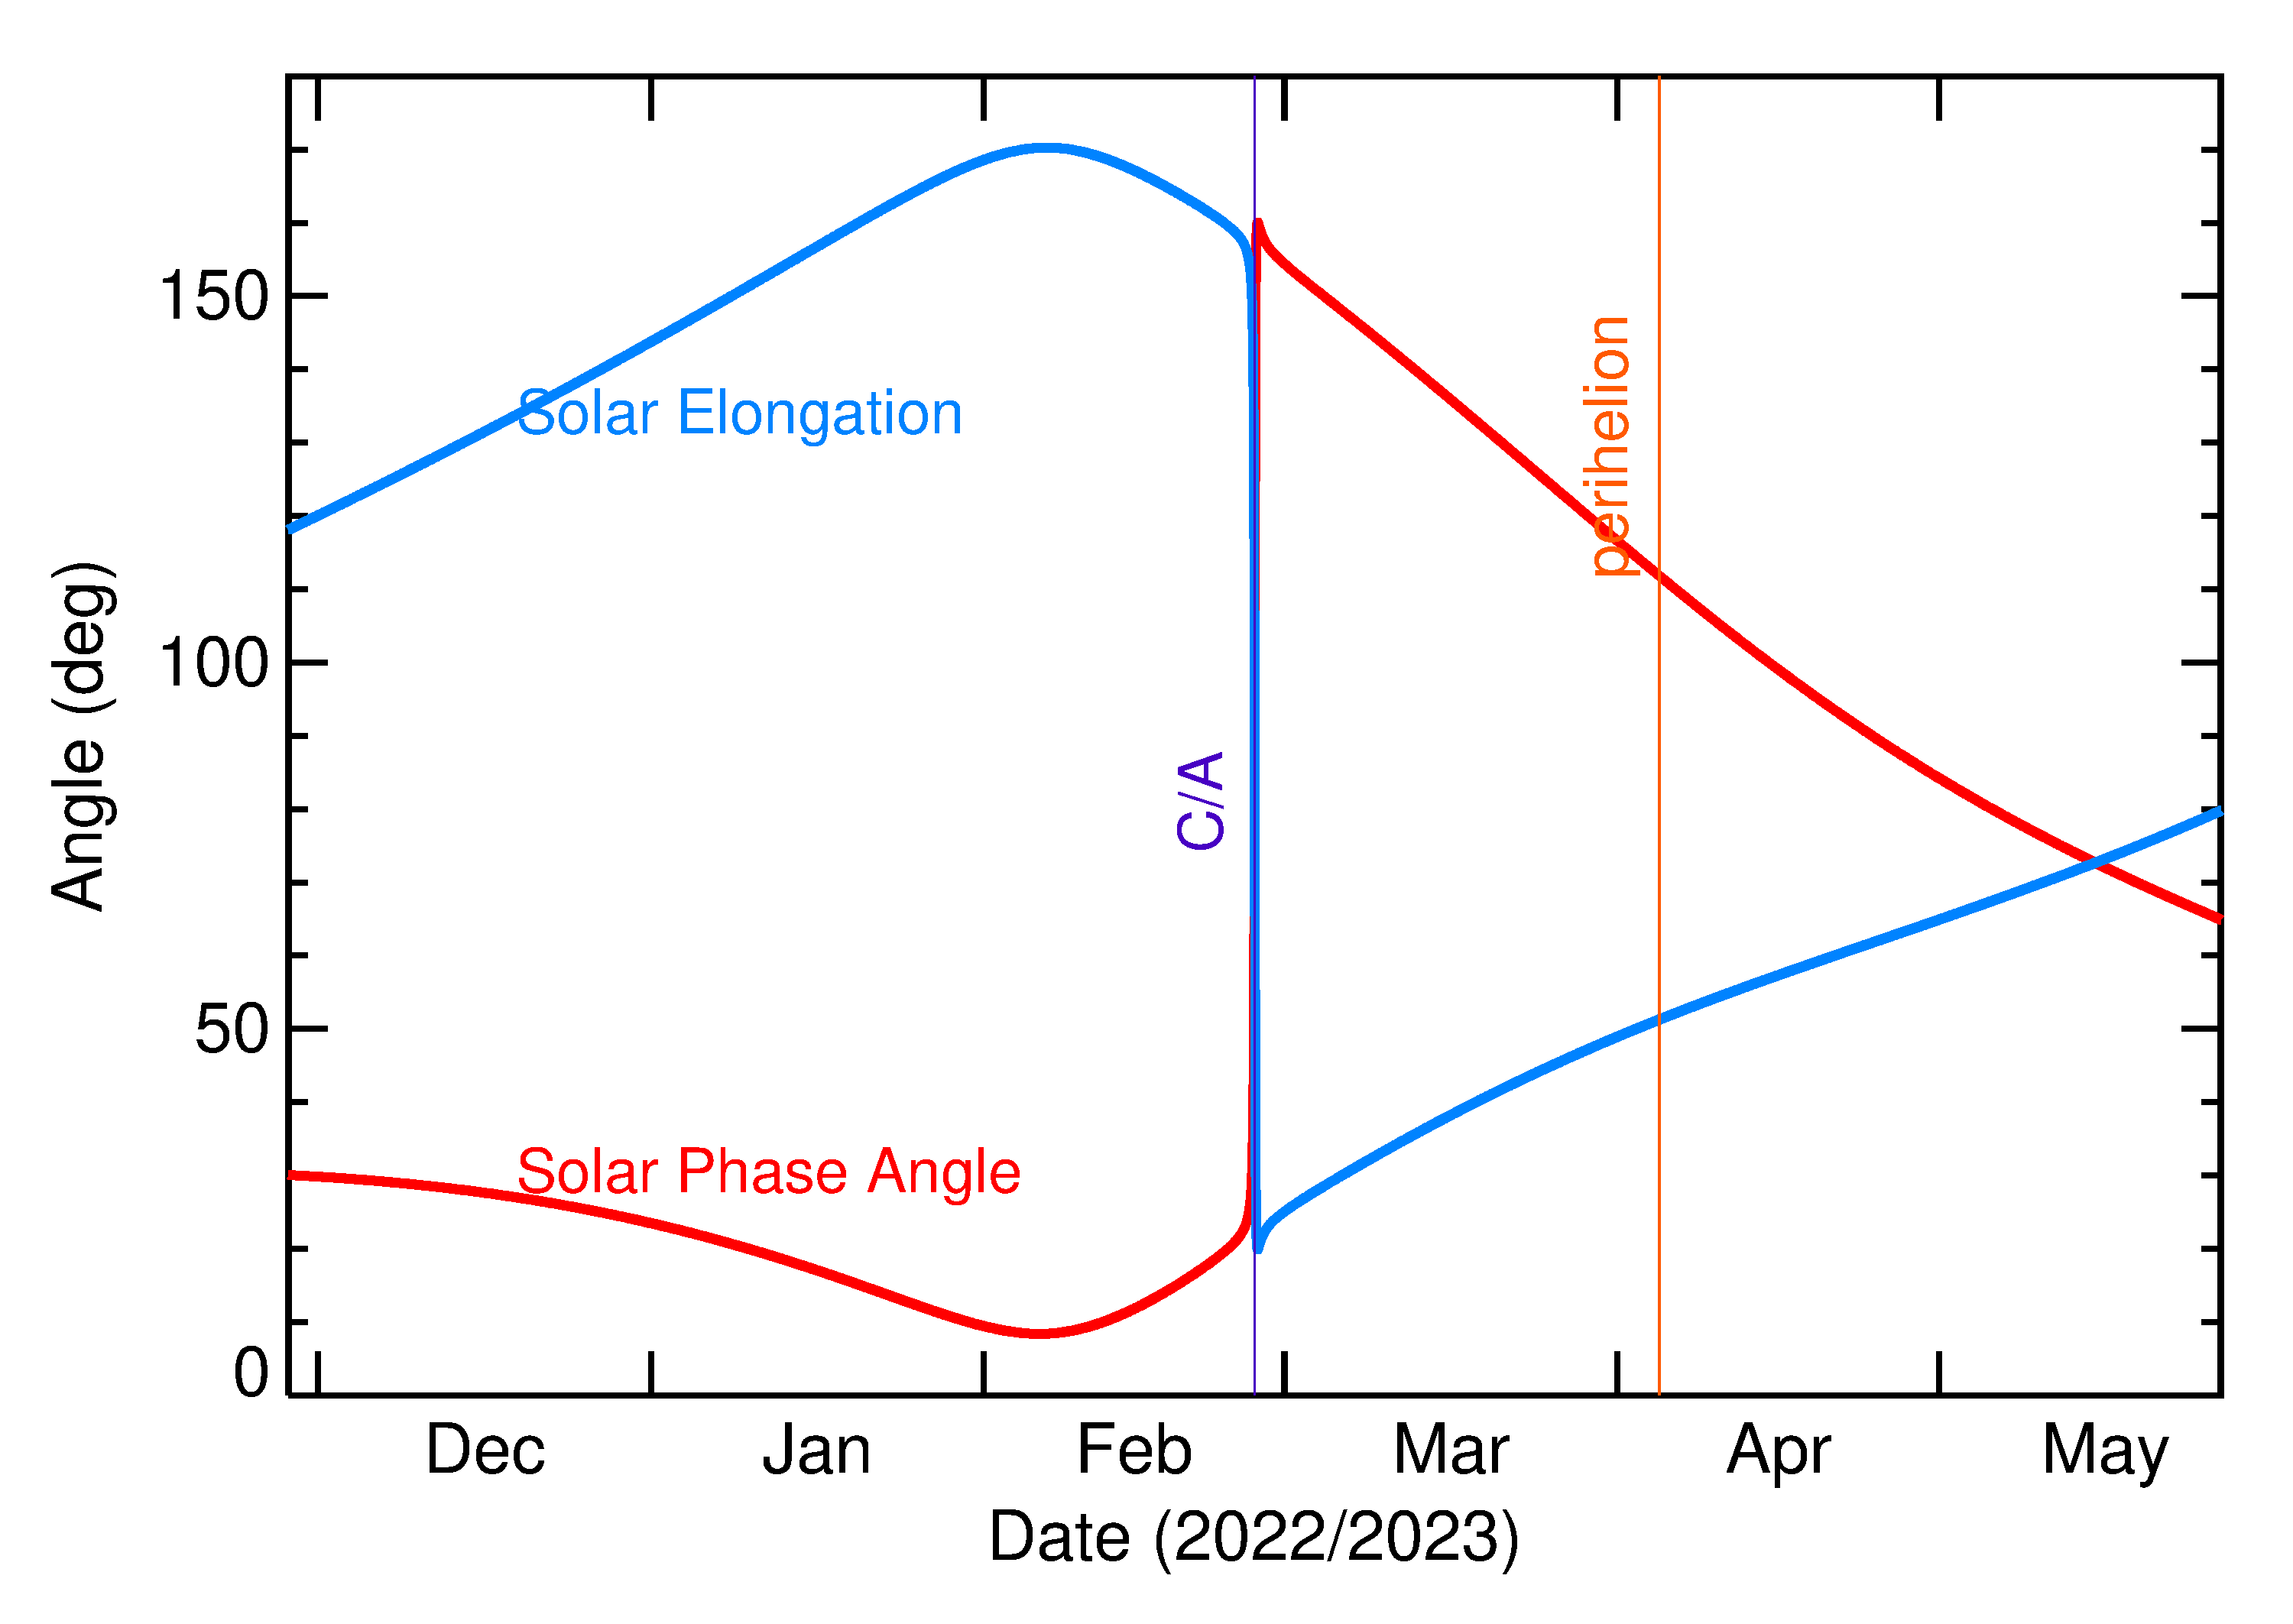 Solar Elongation and Solar Phase Angle of 2023 DR in the months around closest approach